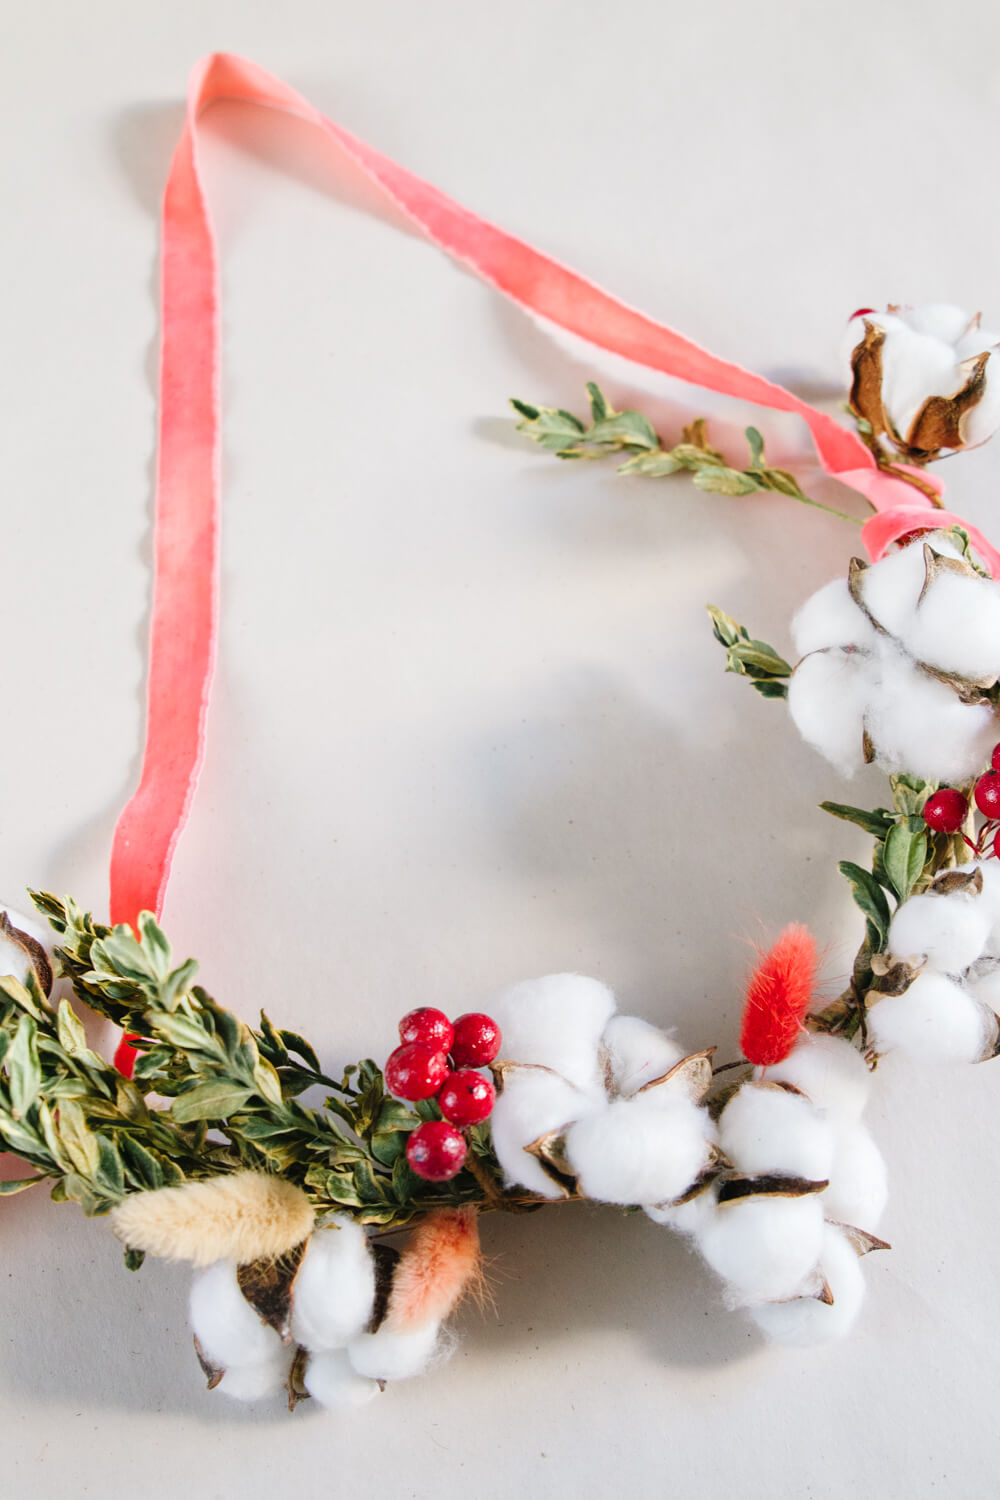 Adding red berries to diy Christmas wreath.